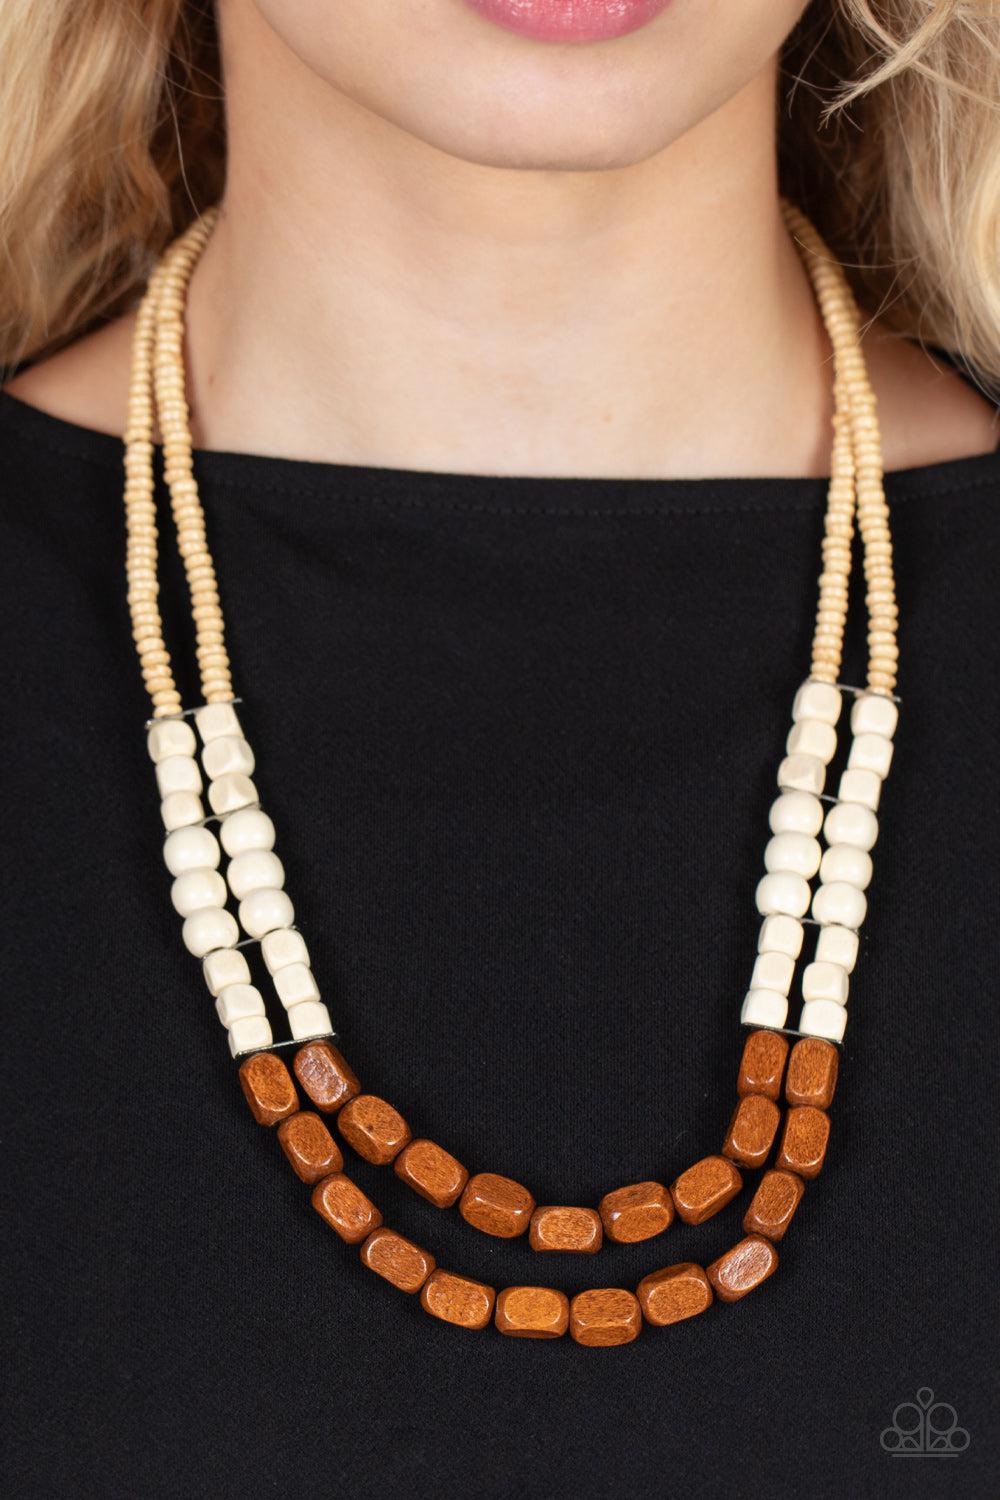 Bermuda Bellhop Brown & White Wood Necklace - Paparazzi Accessories- lightbox - CarasShop.com - $5 Jewelry by Cara Jewels